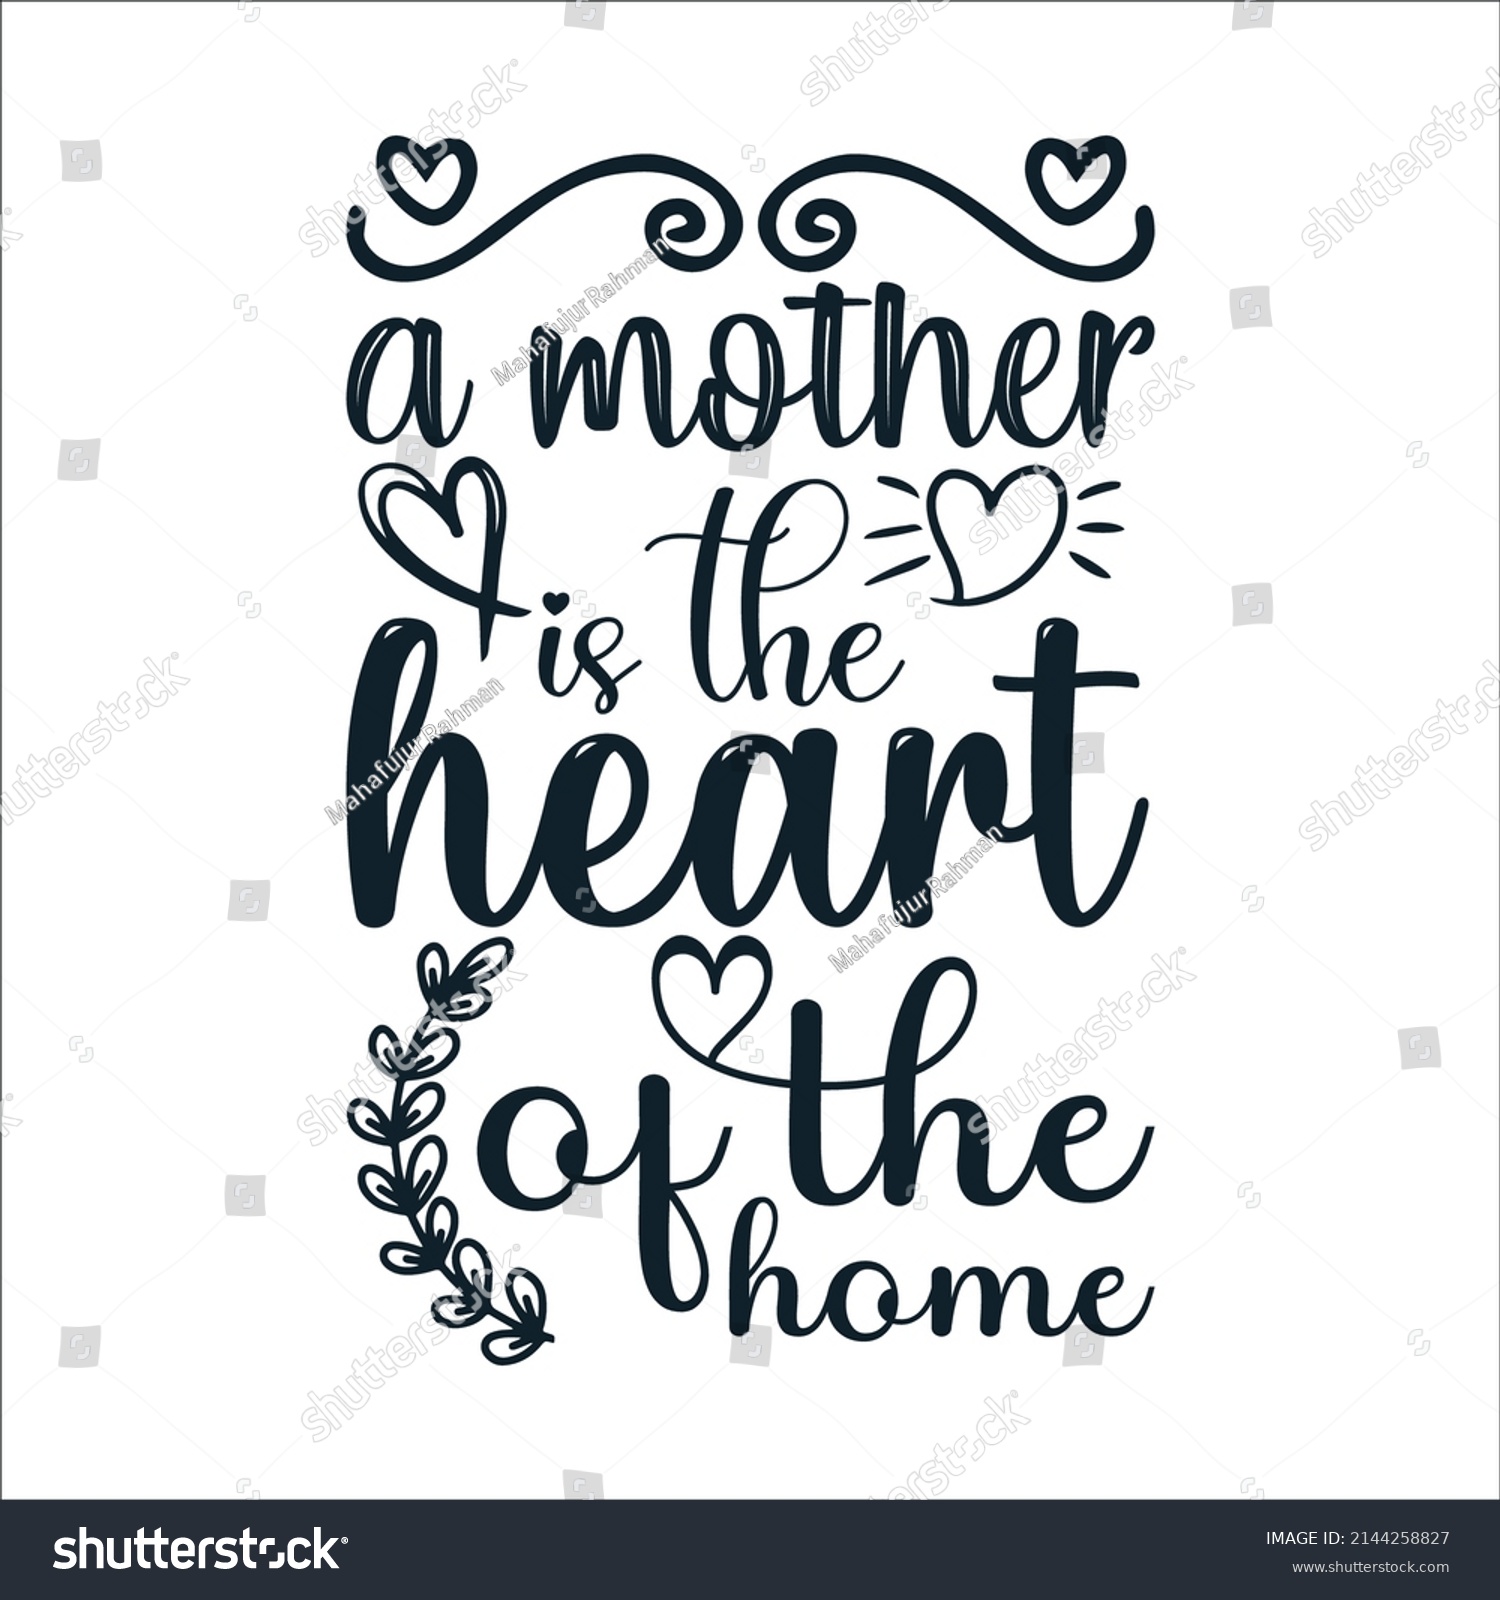 SVG of A mother is the heart the of home Mother's Day Typography Vintage Tshirt Design For t-shirt print and other uses template Vector EPS File svg